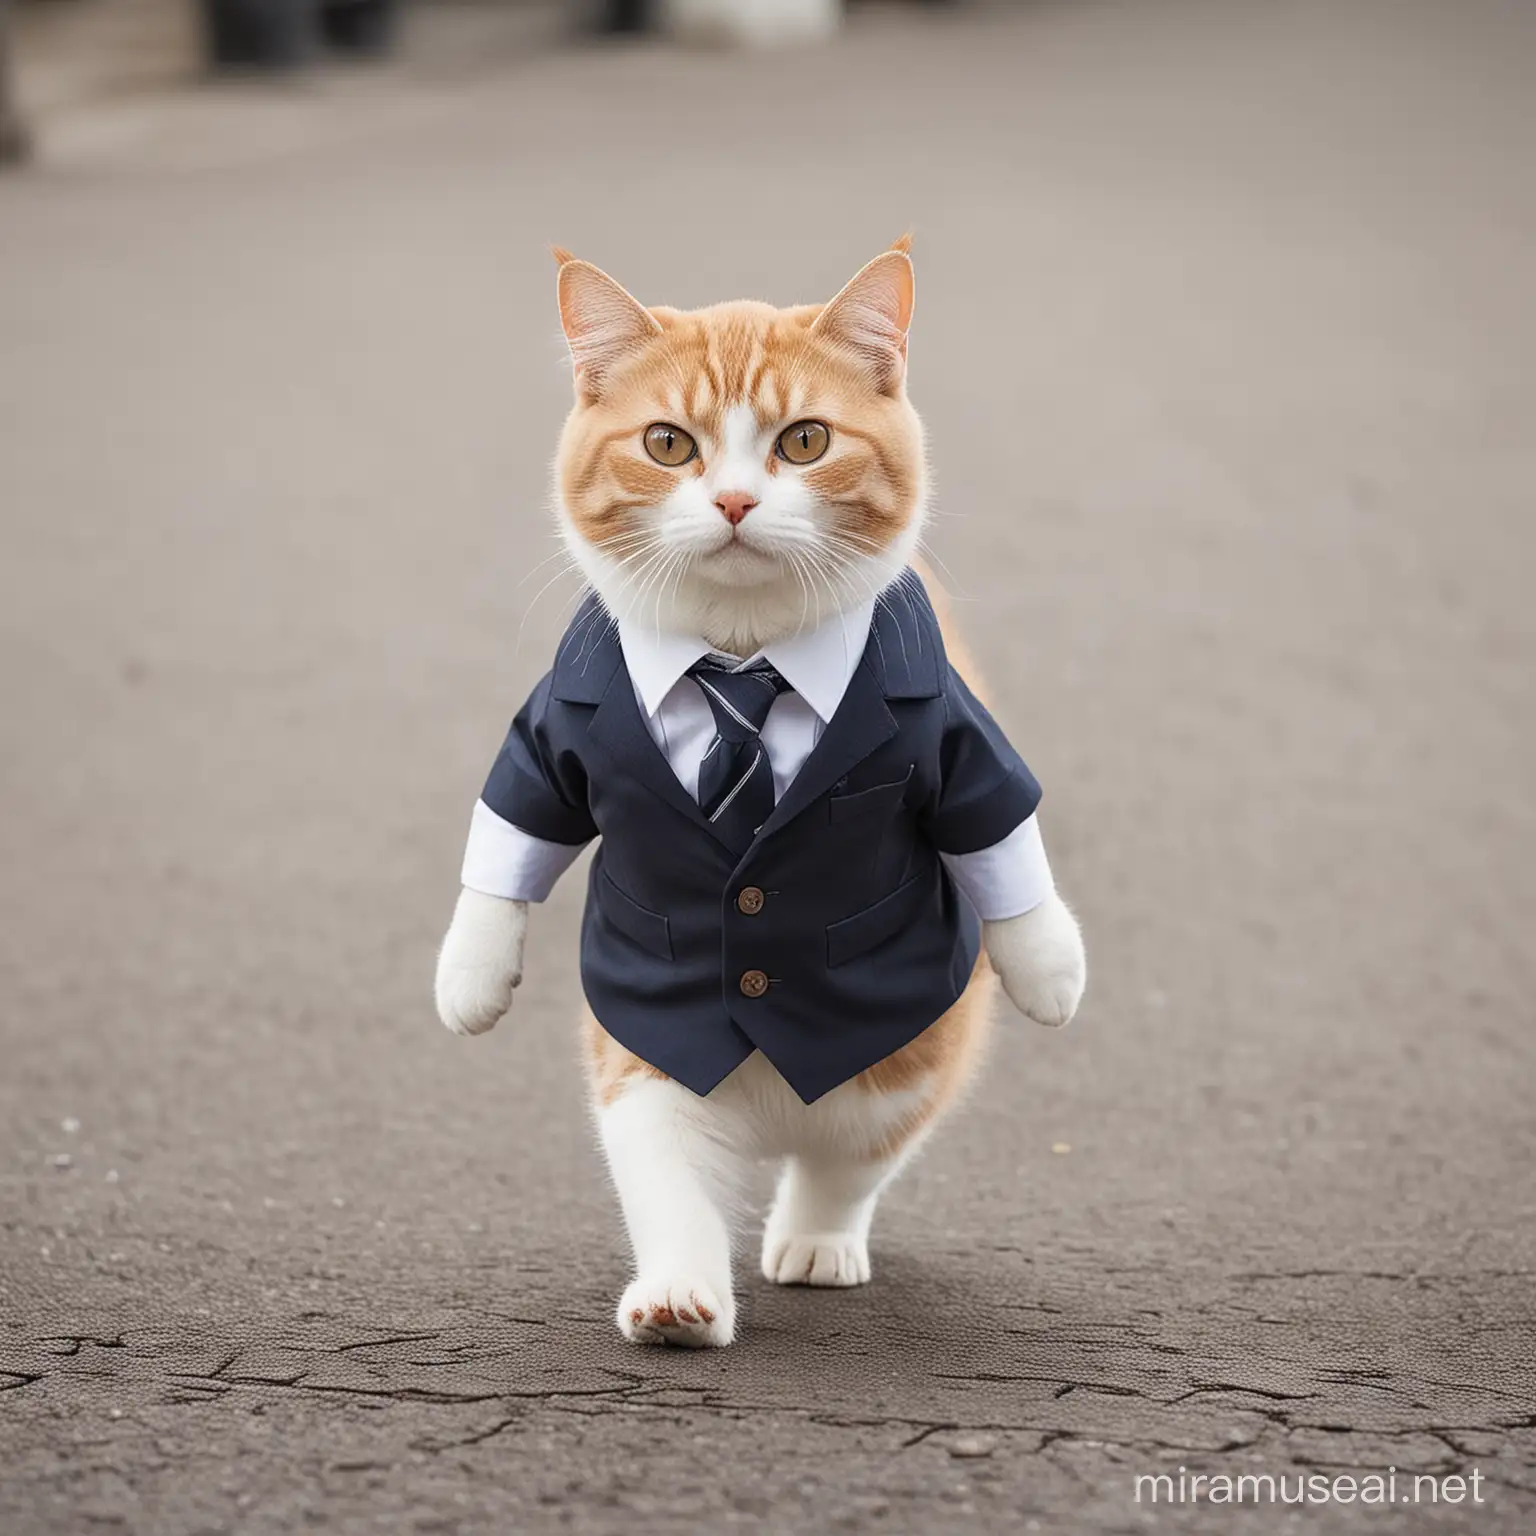 Adorable Cat in Professional Attire Striding Confidently